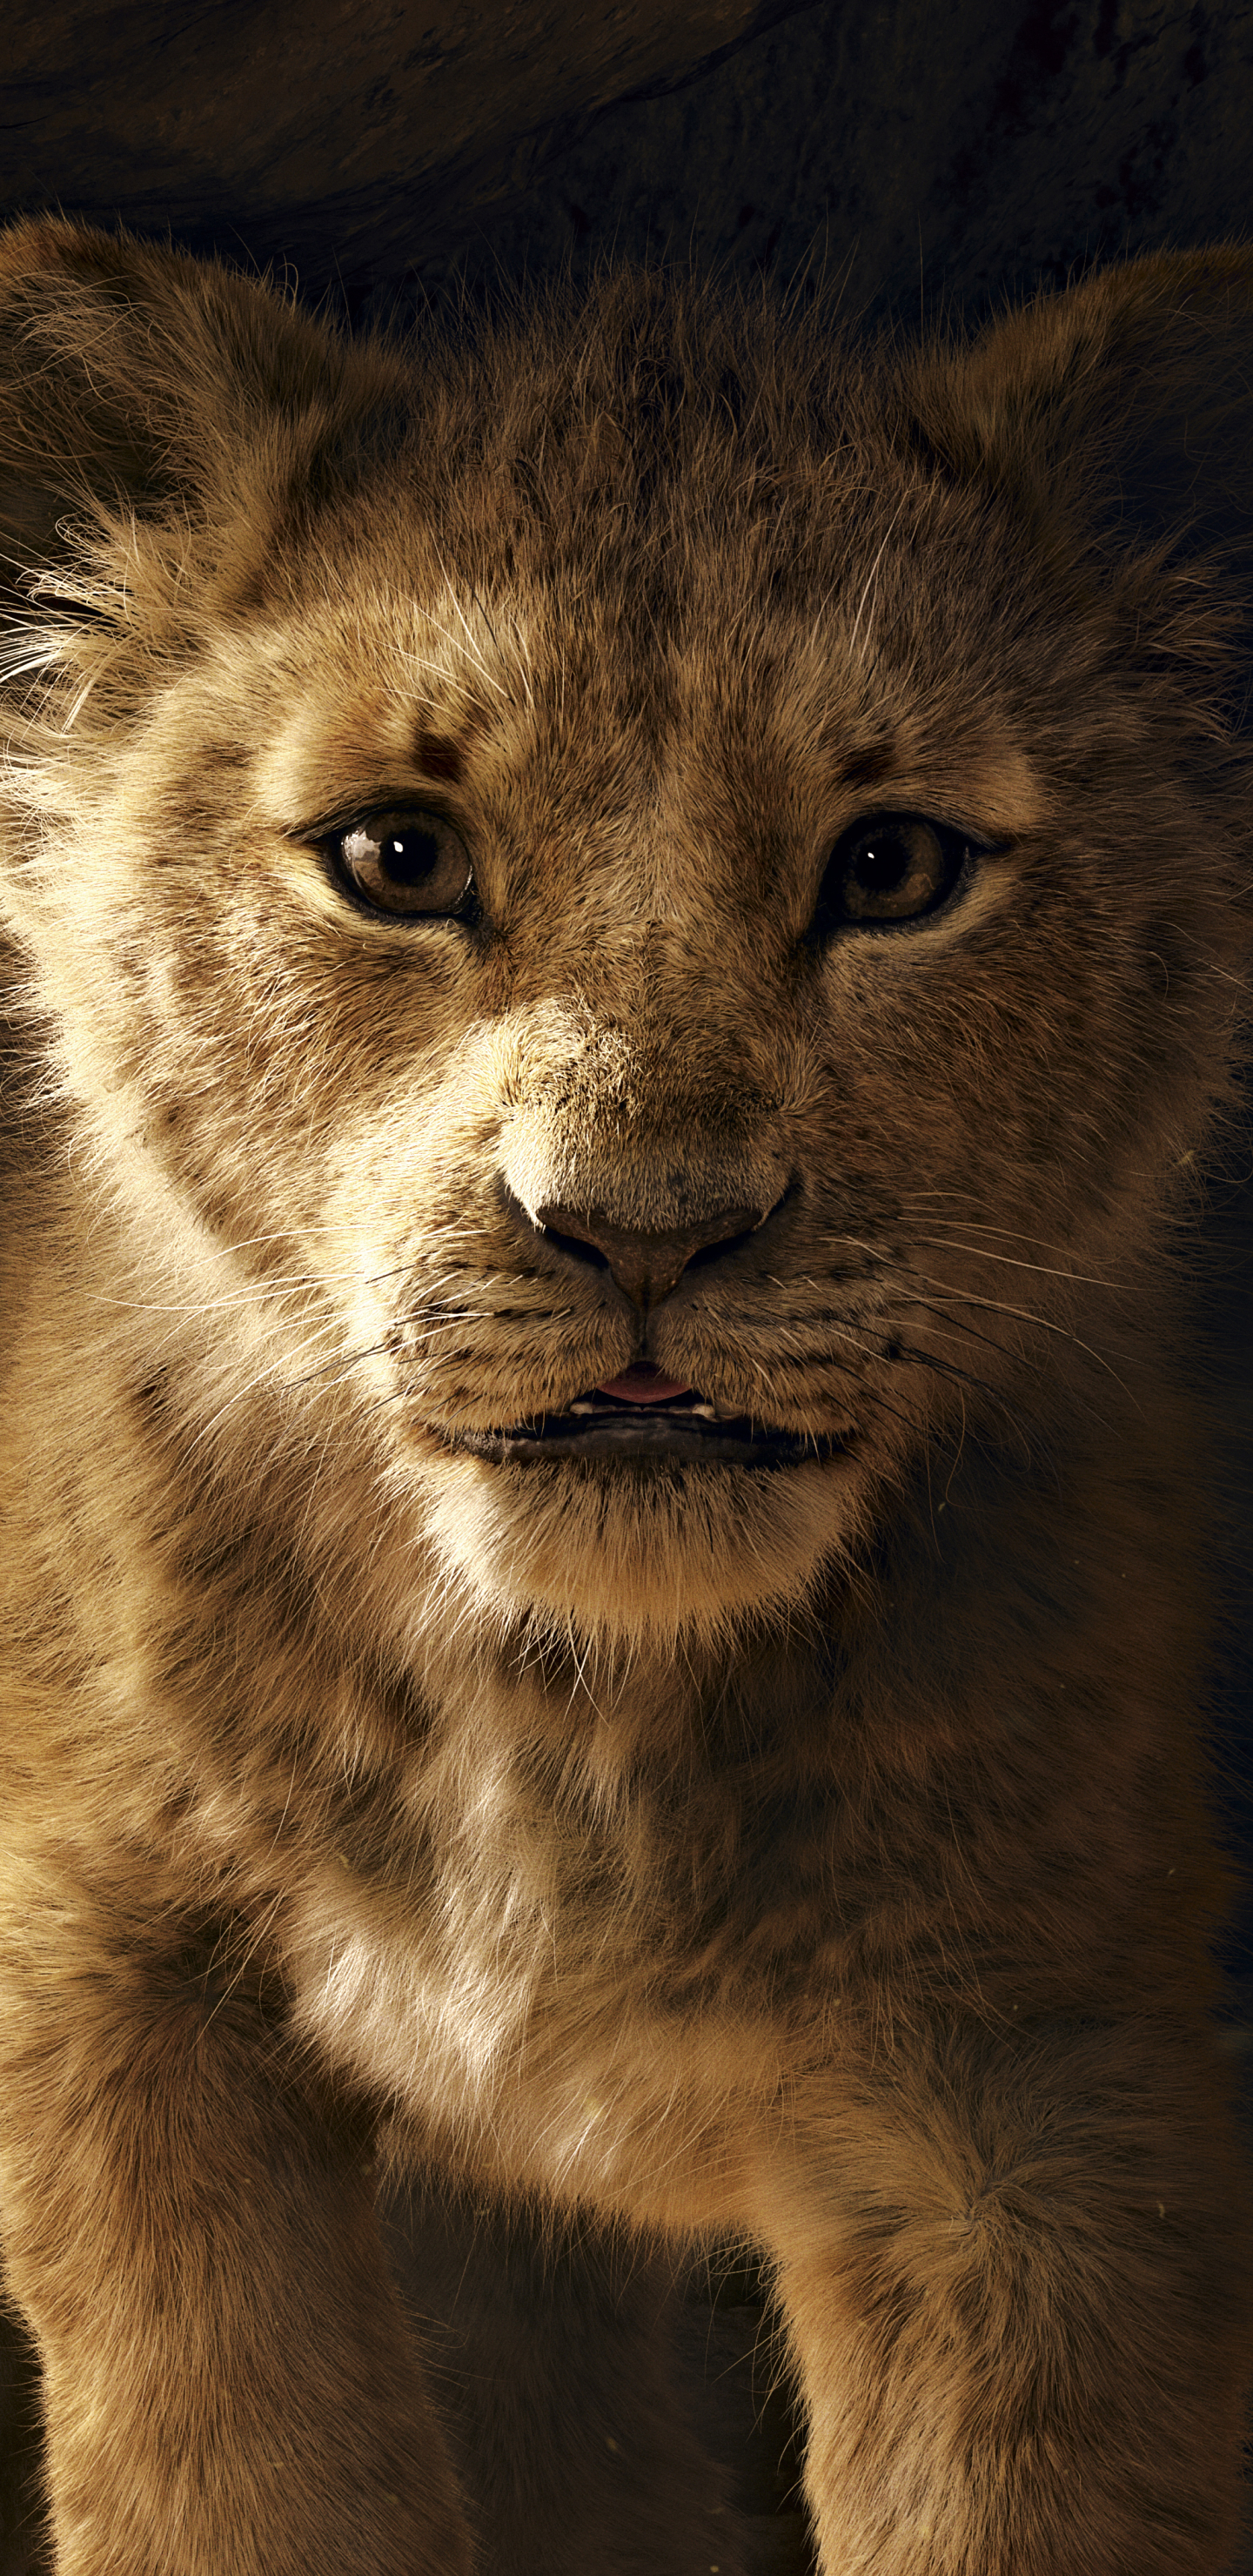 simba, movie, the lion king (2019) iphone wallpaper